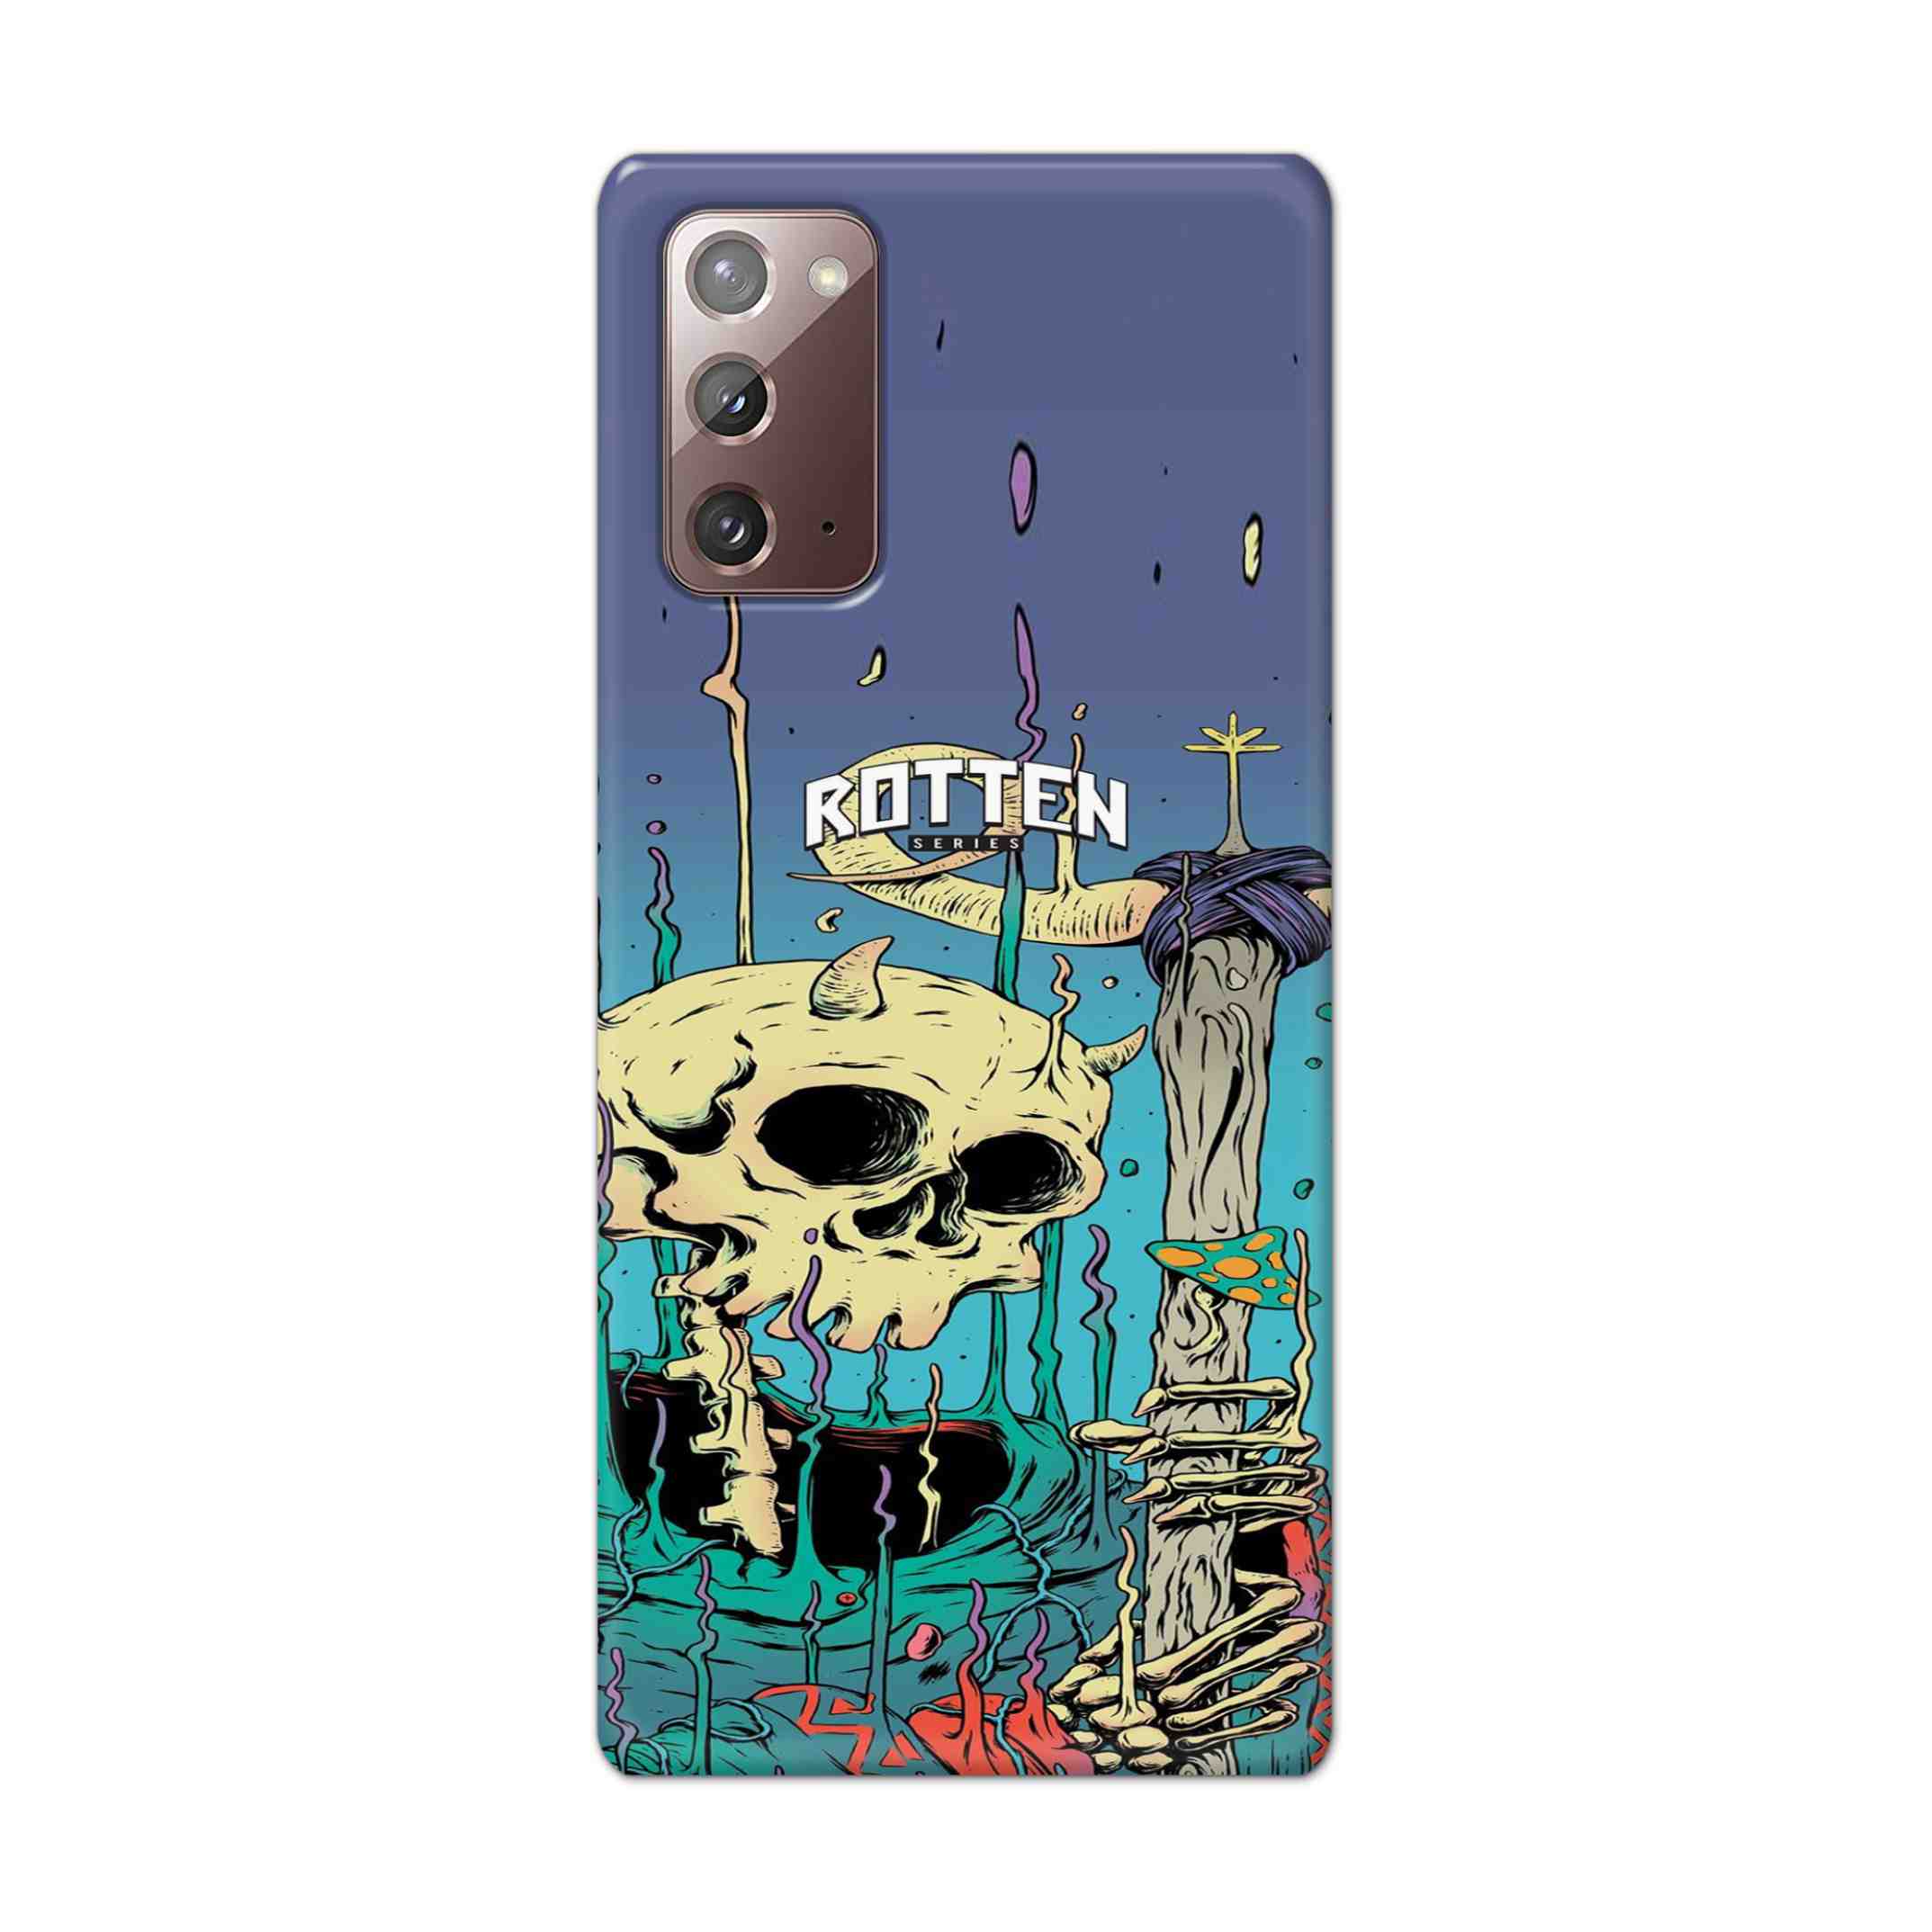 Buy Skull Hard Back Mobile Phone Case Cover For Samsung Galaxy Note 20 Online